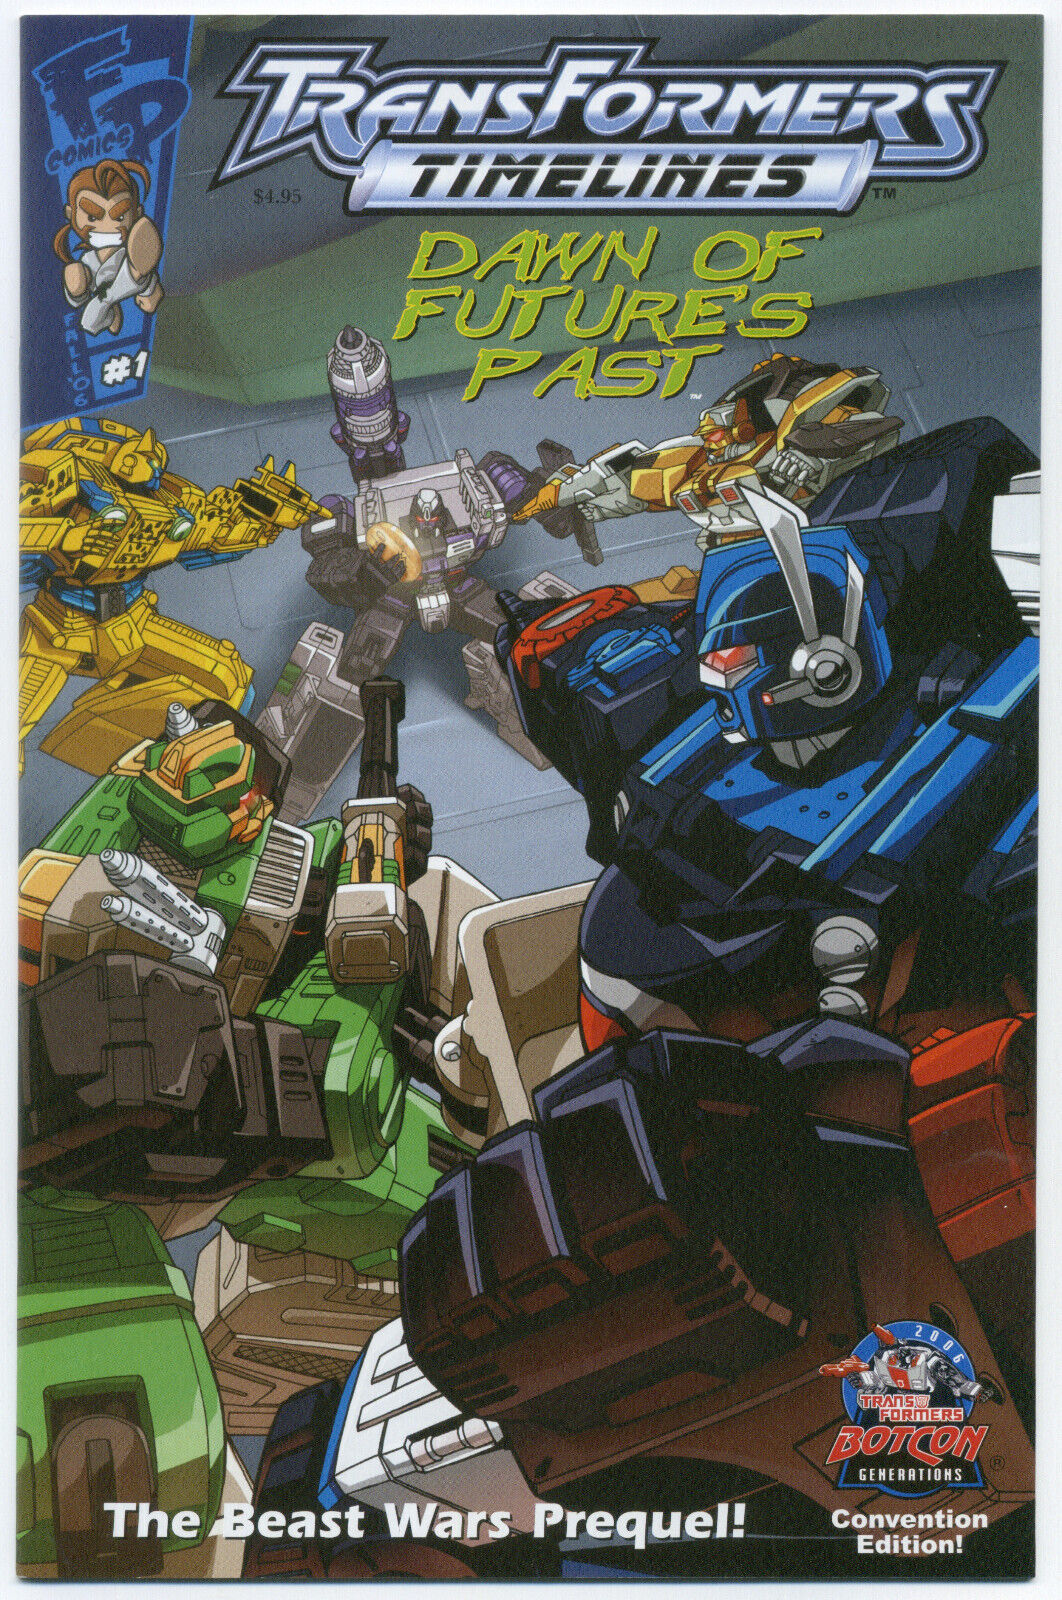 TRANSFORMERS TIMELINES #1; 2006 NM DAWN OF FUTURE\'S PAST Convention Edition